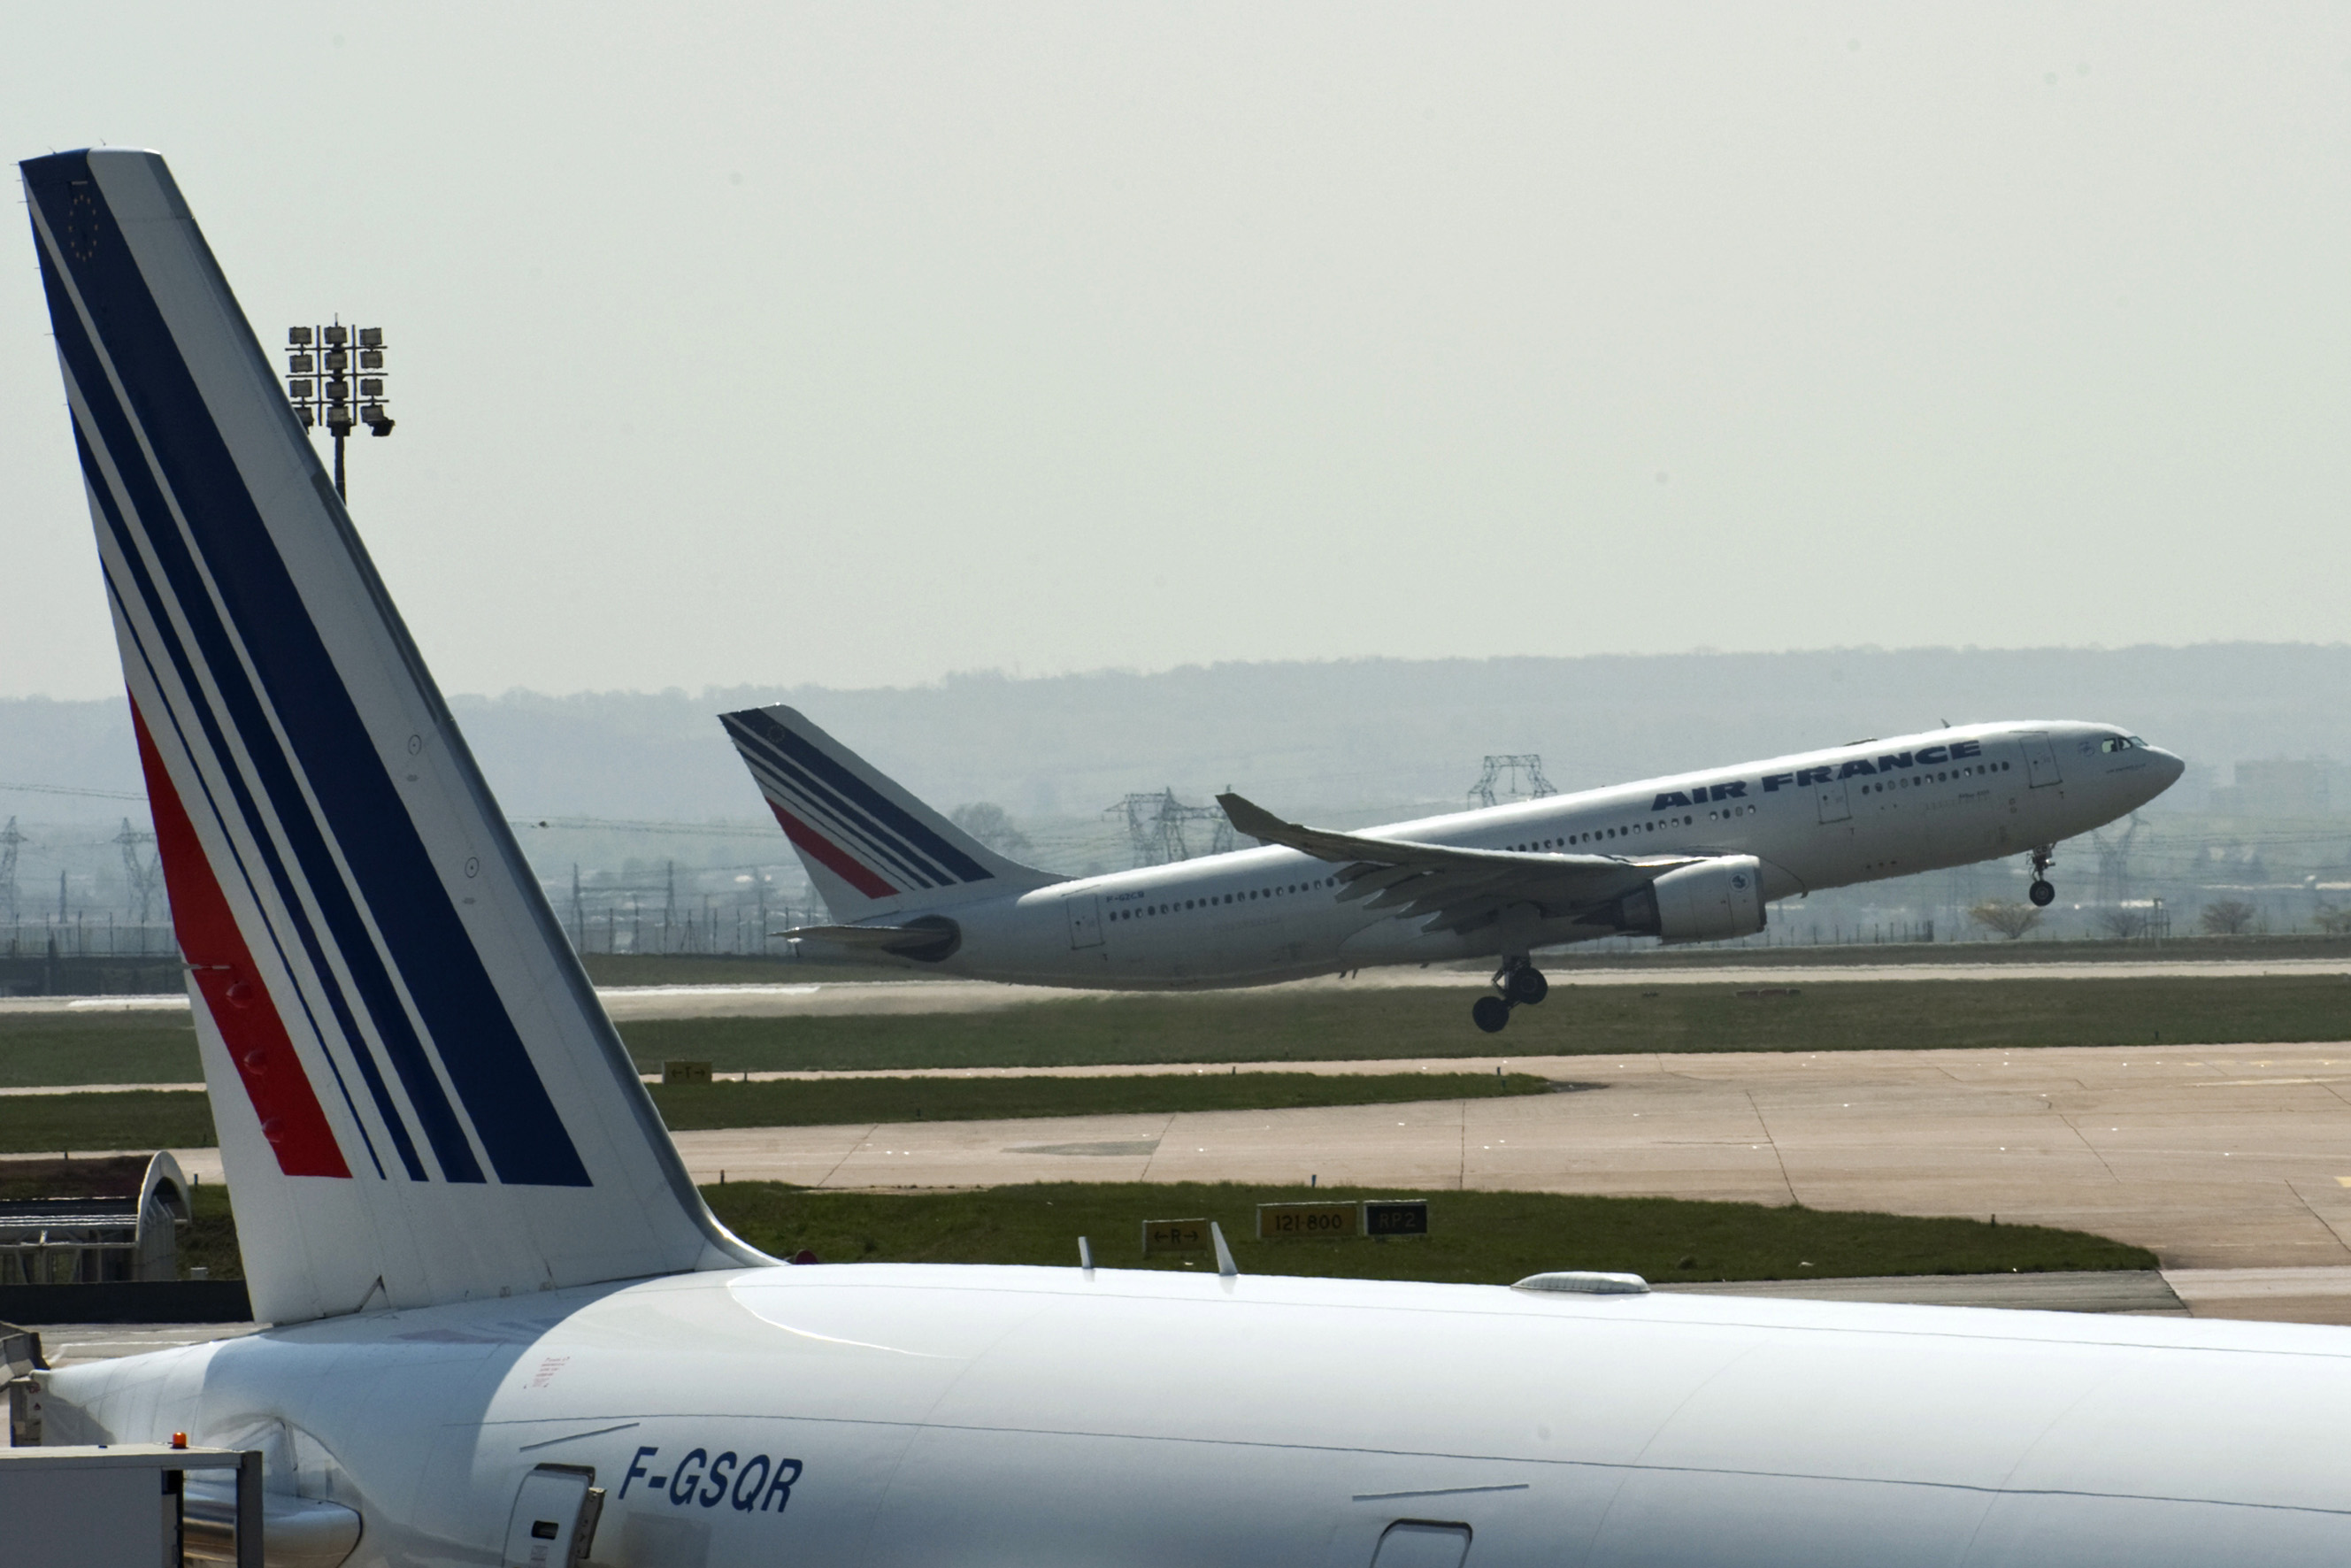 An Air France plane takes off from Paris' Charles de Gaulle airport